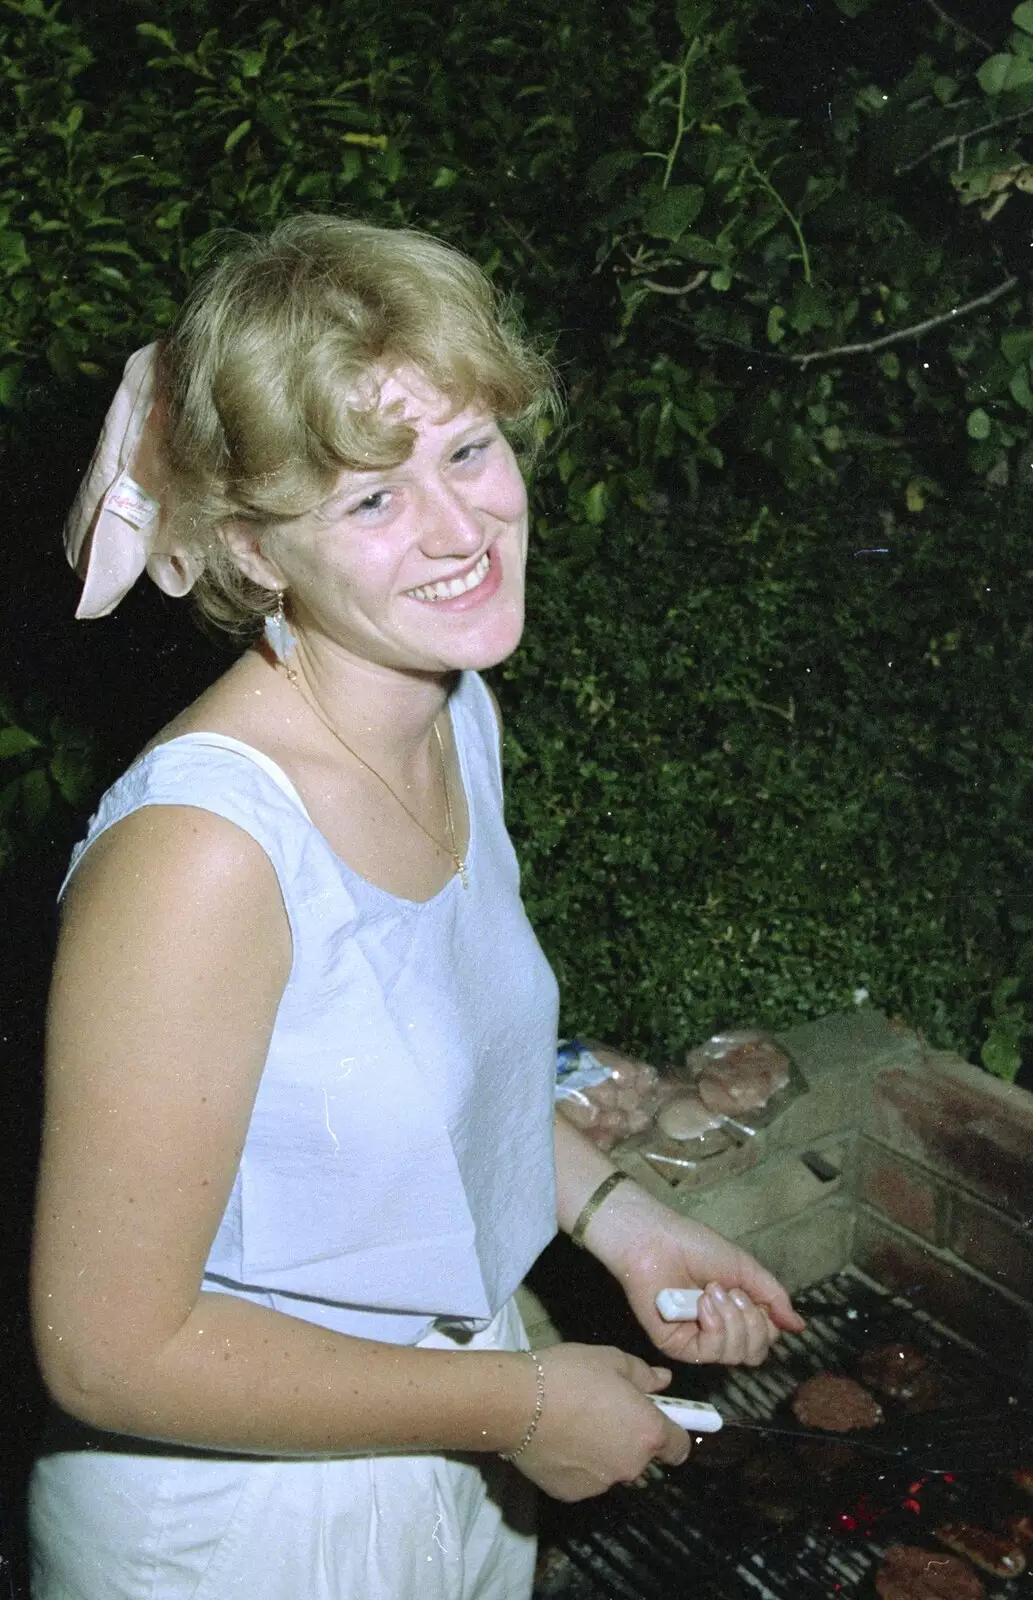 Rosemary on barbeque, from Chris and Phil's Party, Hordle, Hampshire - 6th September 1989